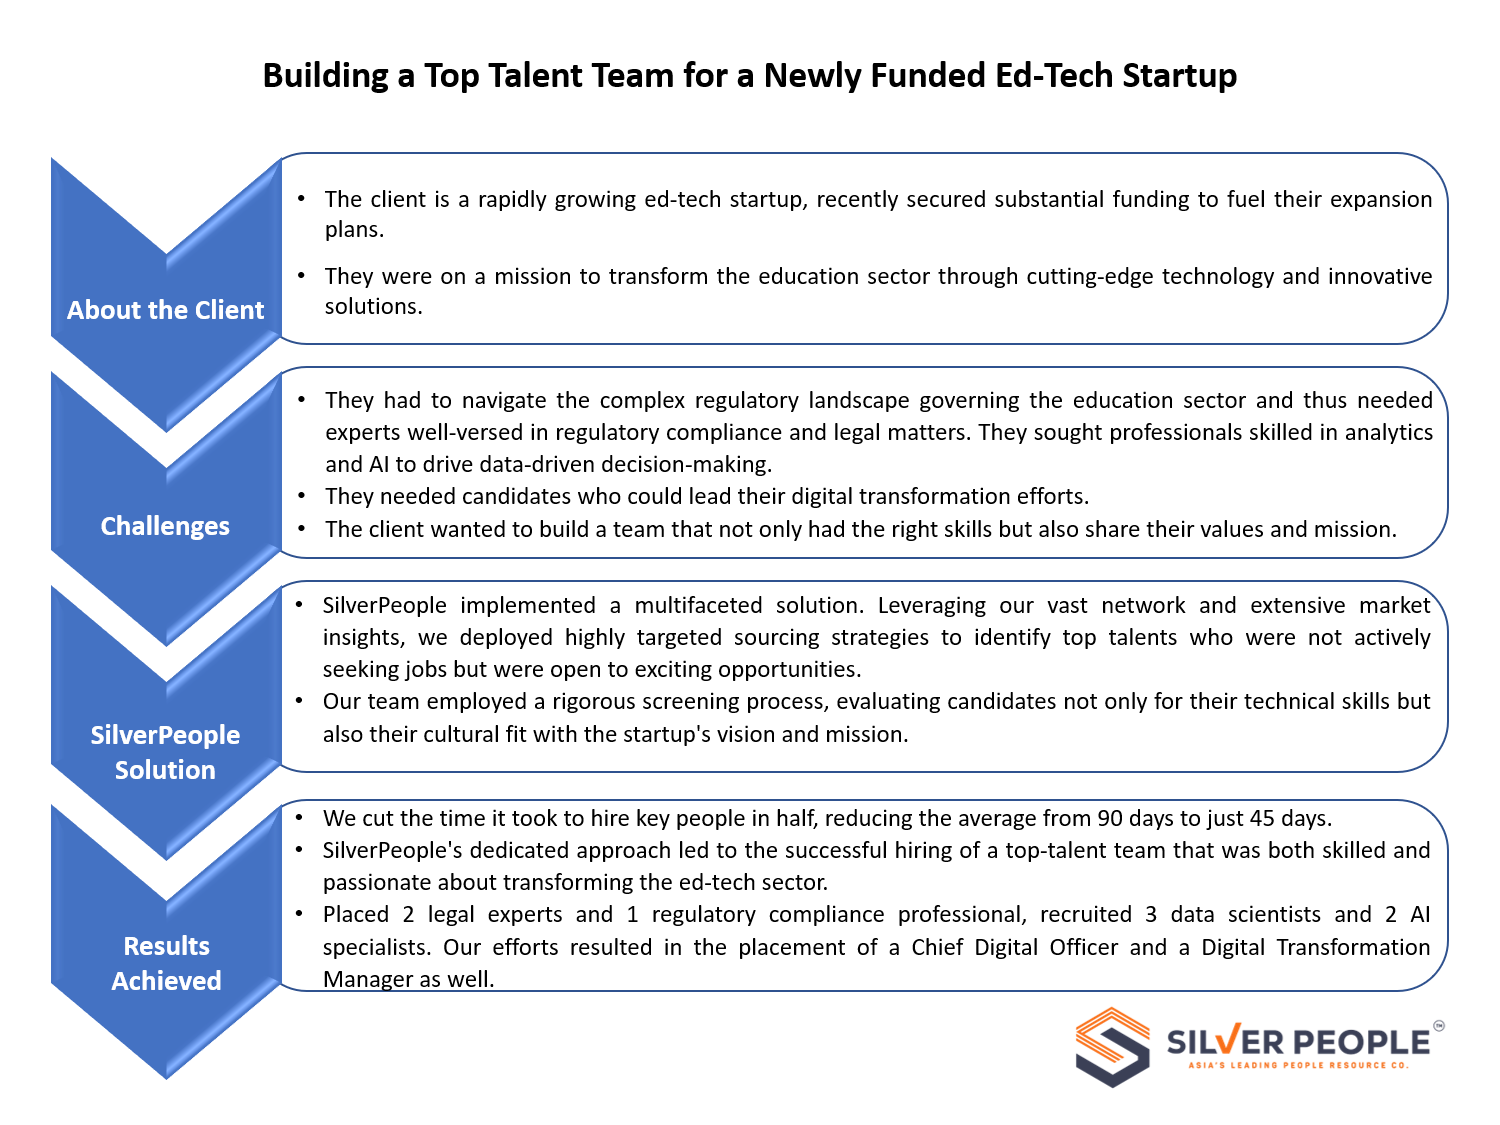 Building a Top Talent Team for a Newly Funded Ed-Tech Startup